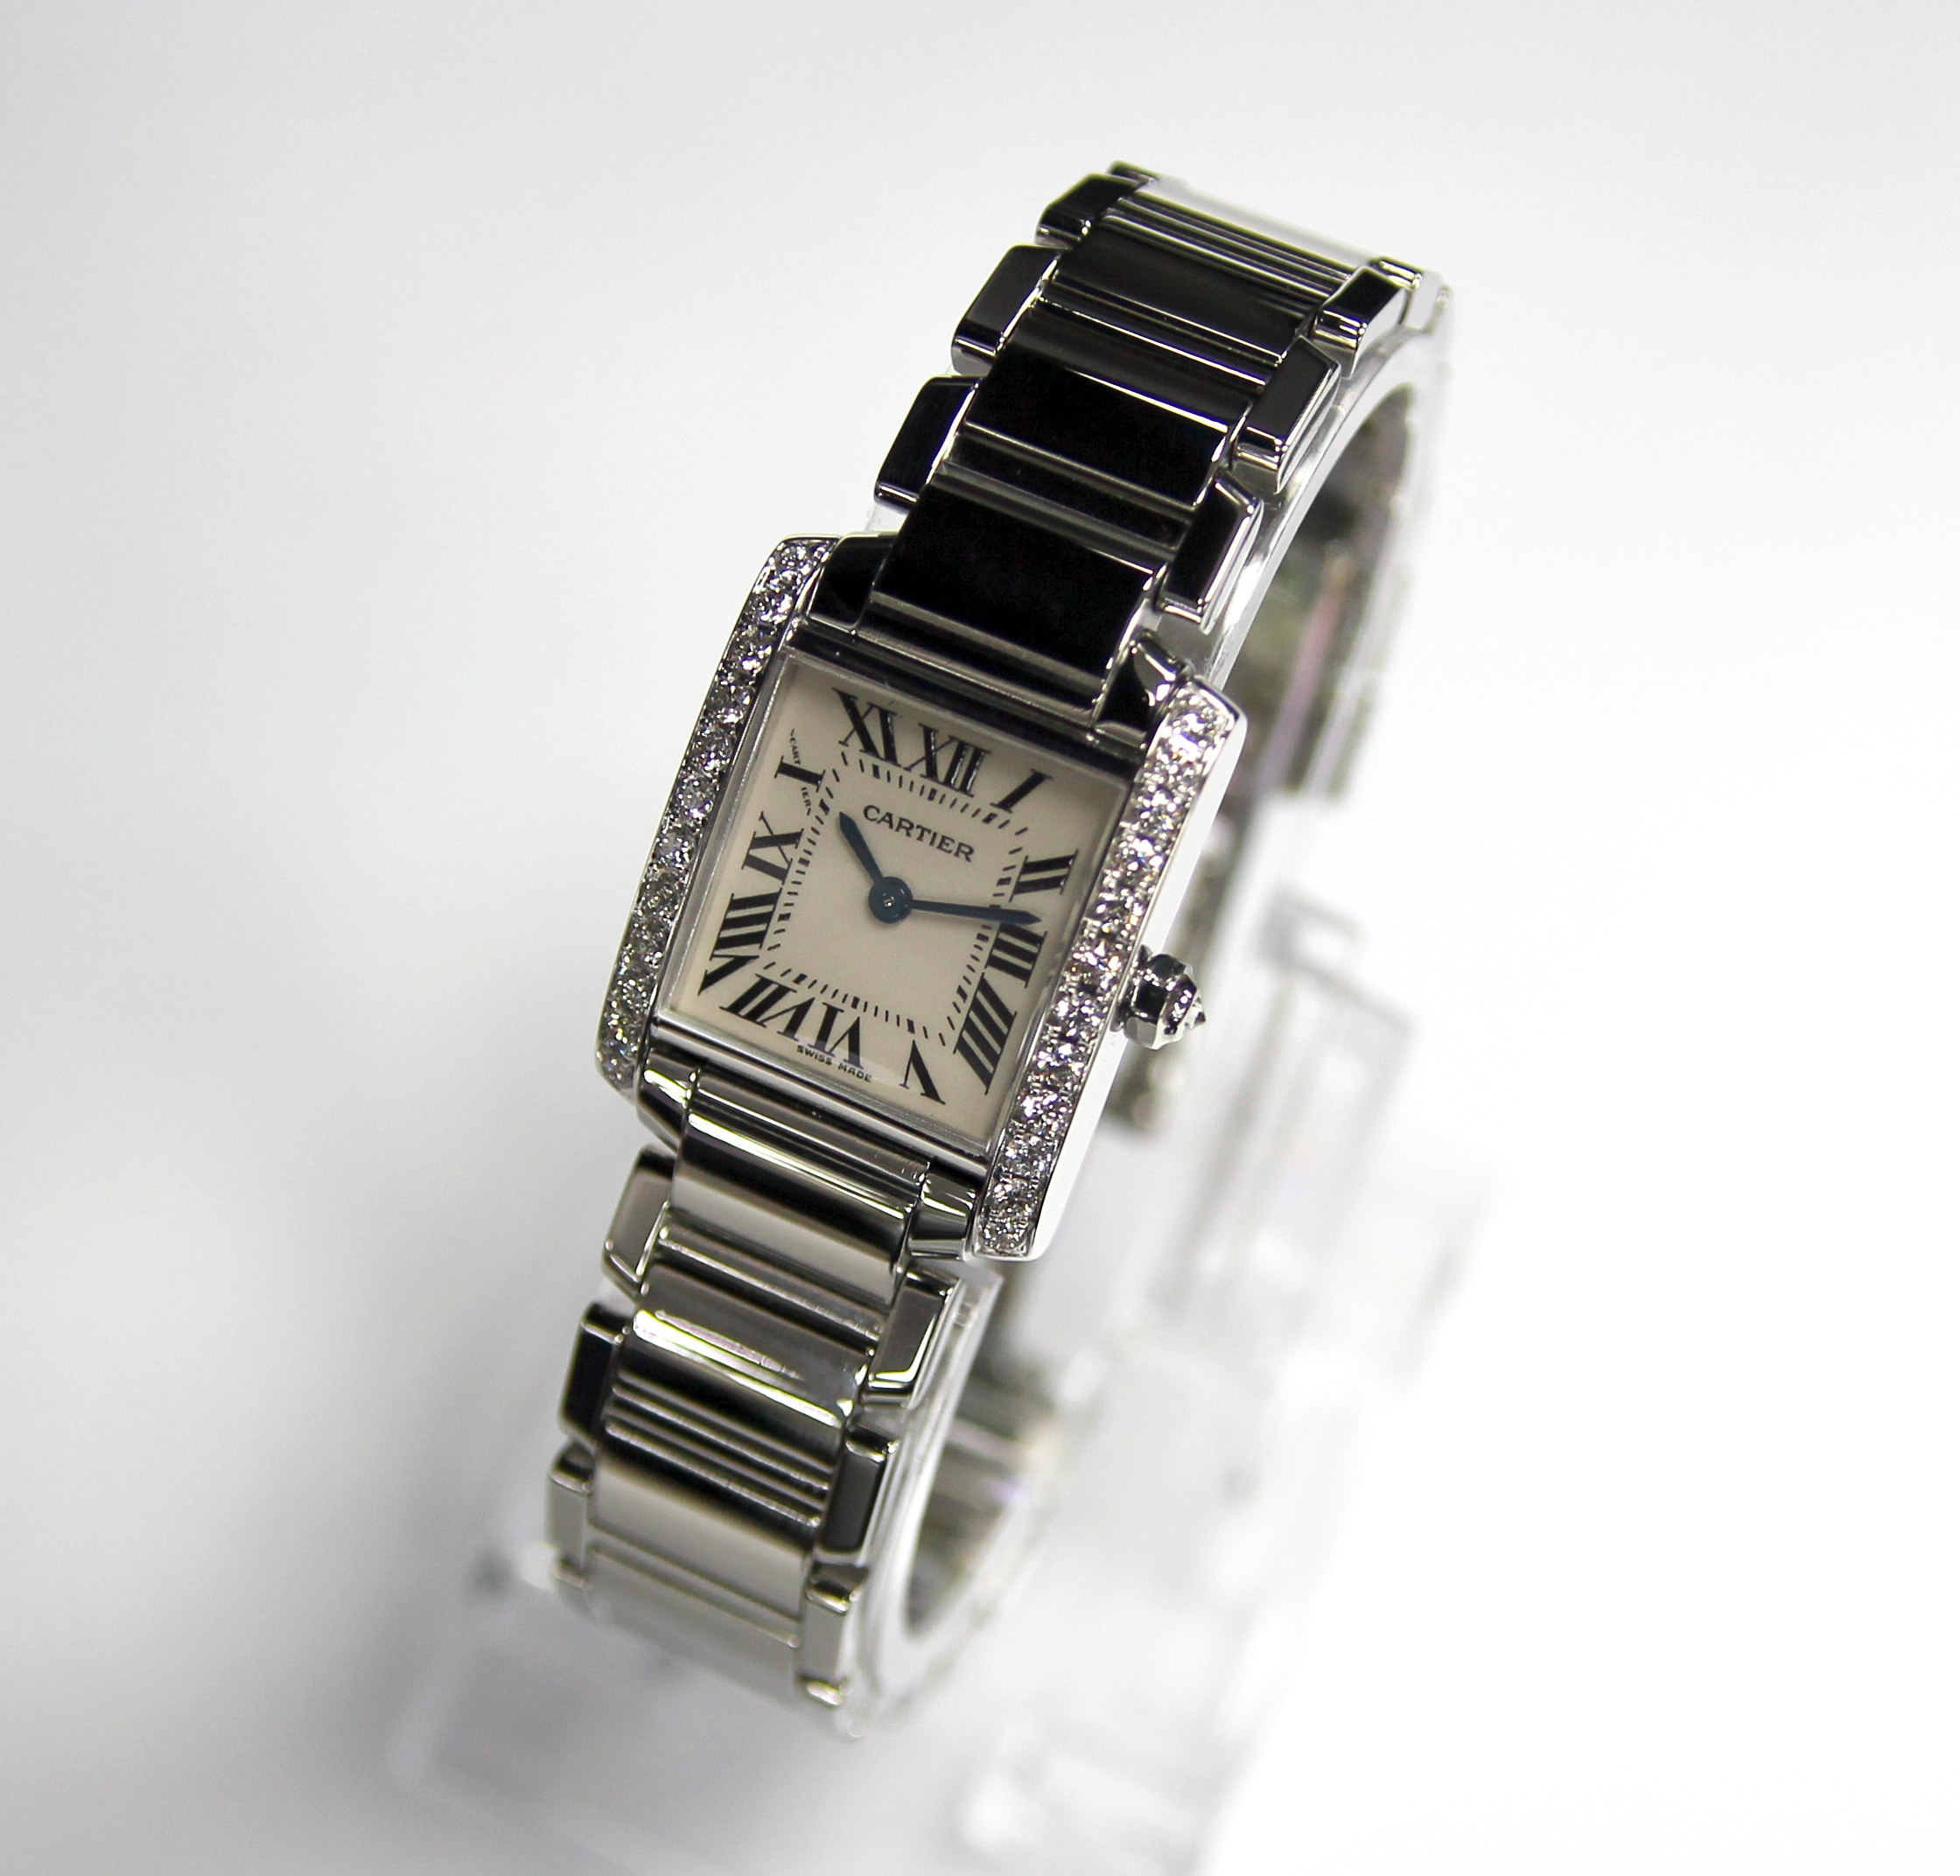 Cartier Tank Franciase lady's wristwatch 2384 in stainless steel case, white dial, - Image 4 of 8